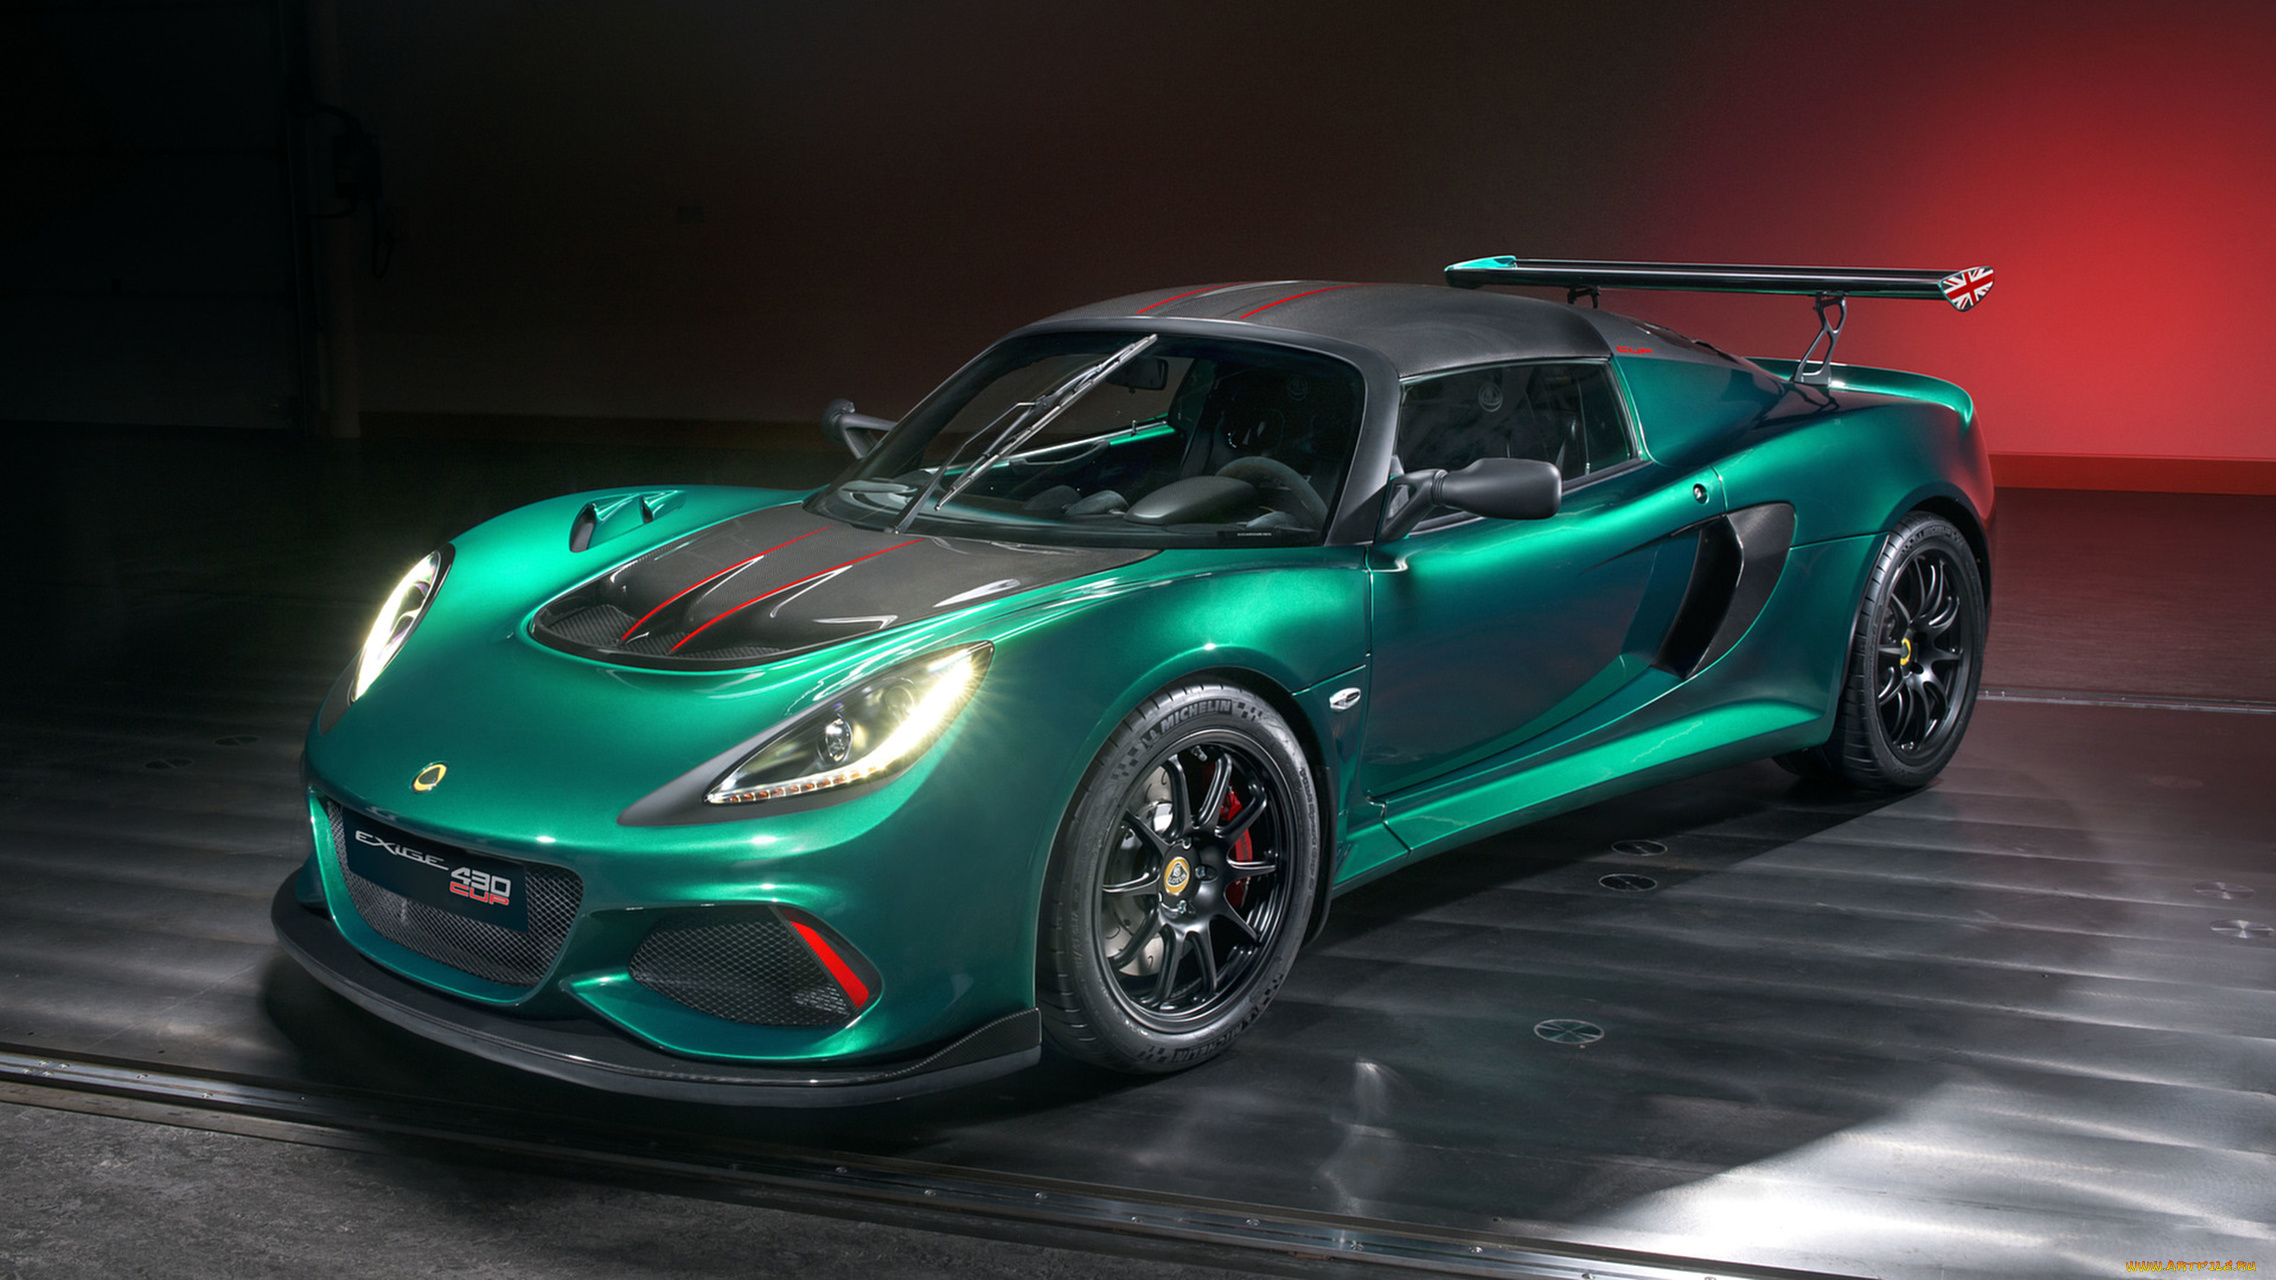 lotus, exige, cup, 430, unlimited, edition, 2018, автомобили, lotus, exige, edition, unlimited, 430, cup, 2018